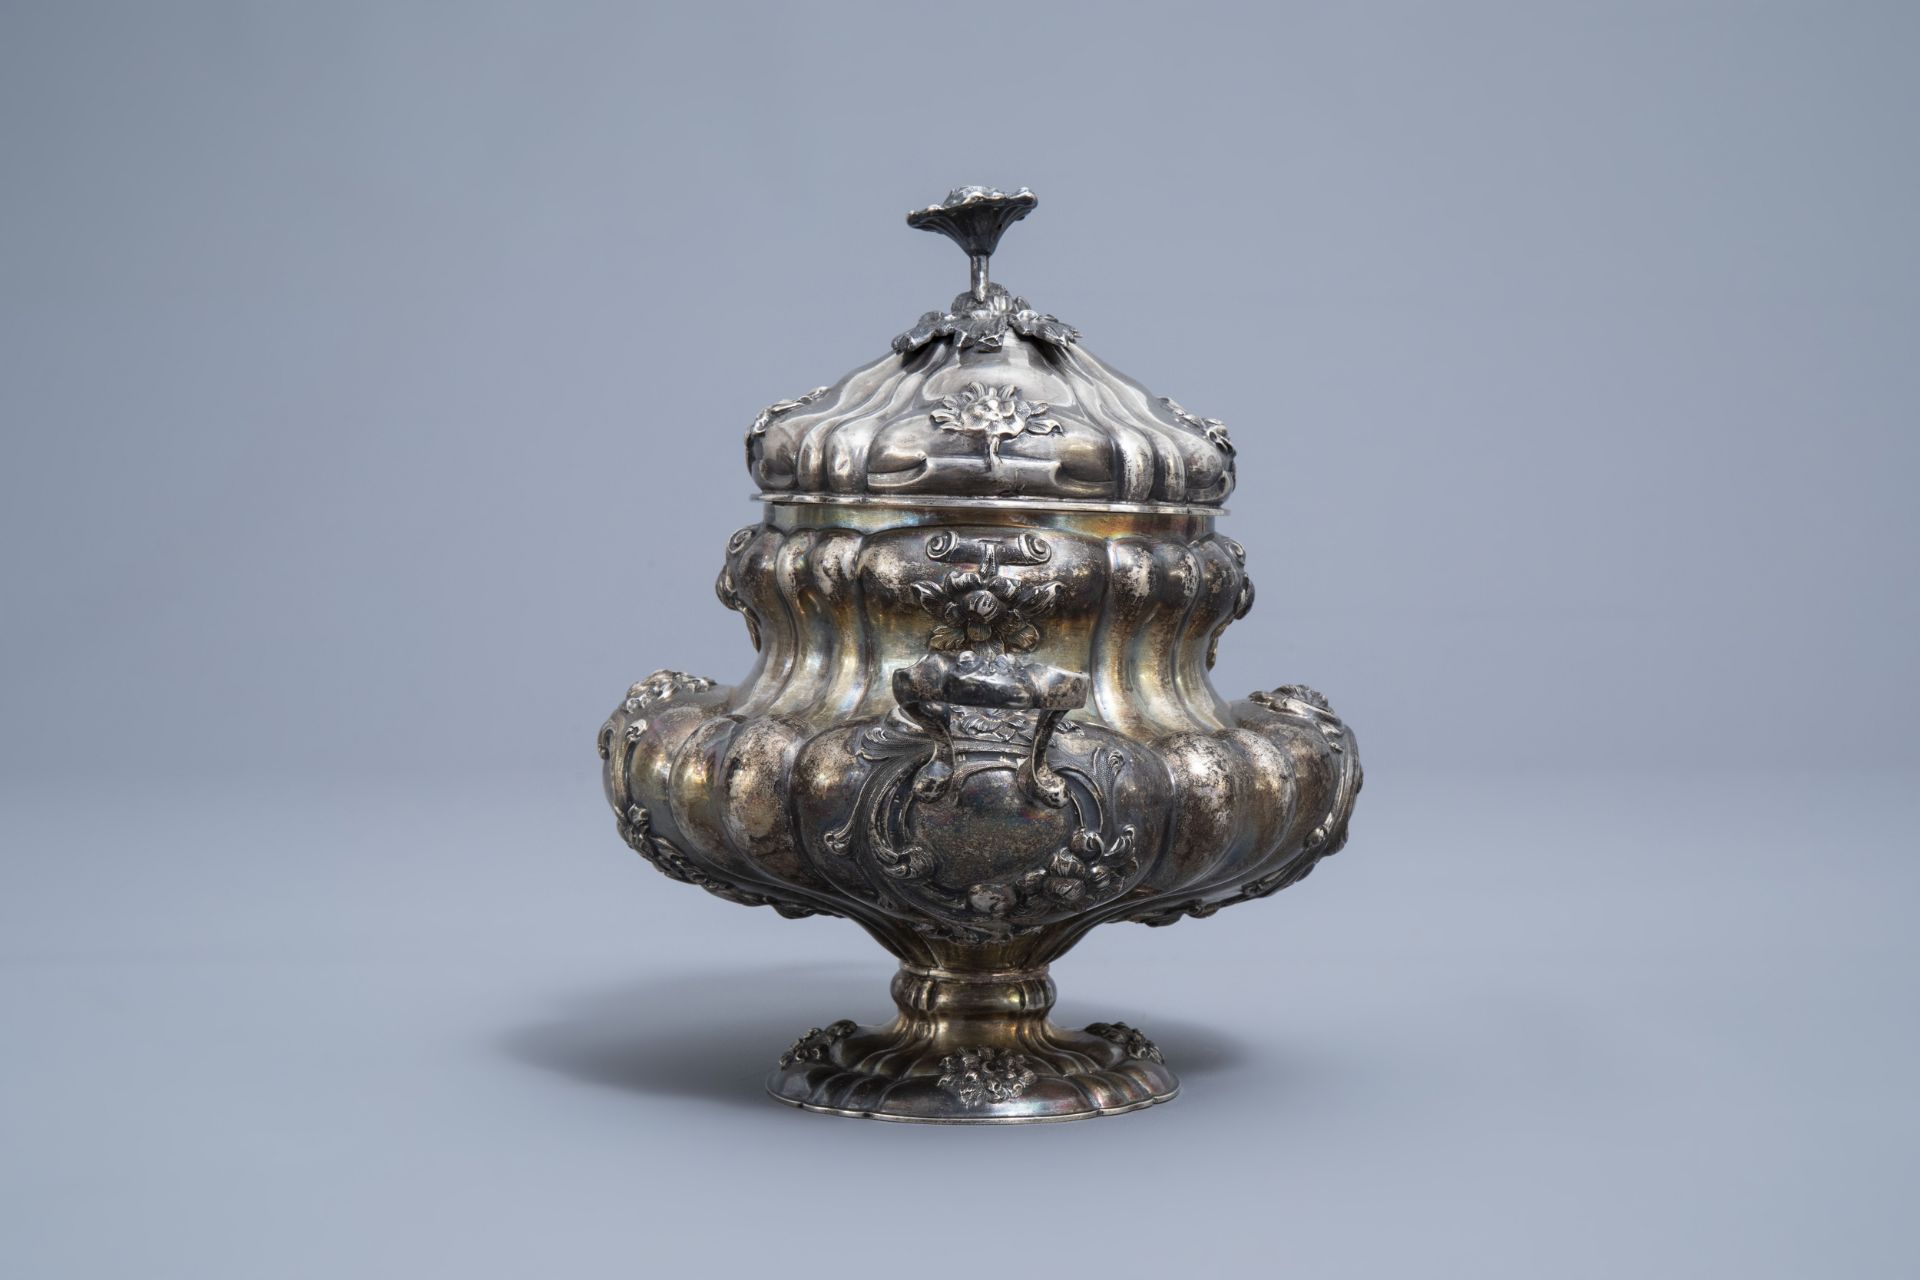 A Belgian silver sugar bowl with relief design, mark Wolfers, 833/000, Brussels, 19th C. - Image 6 of 11